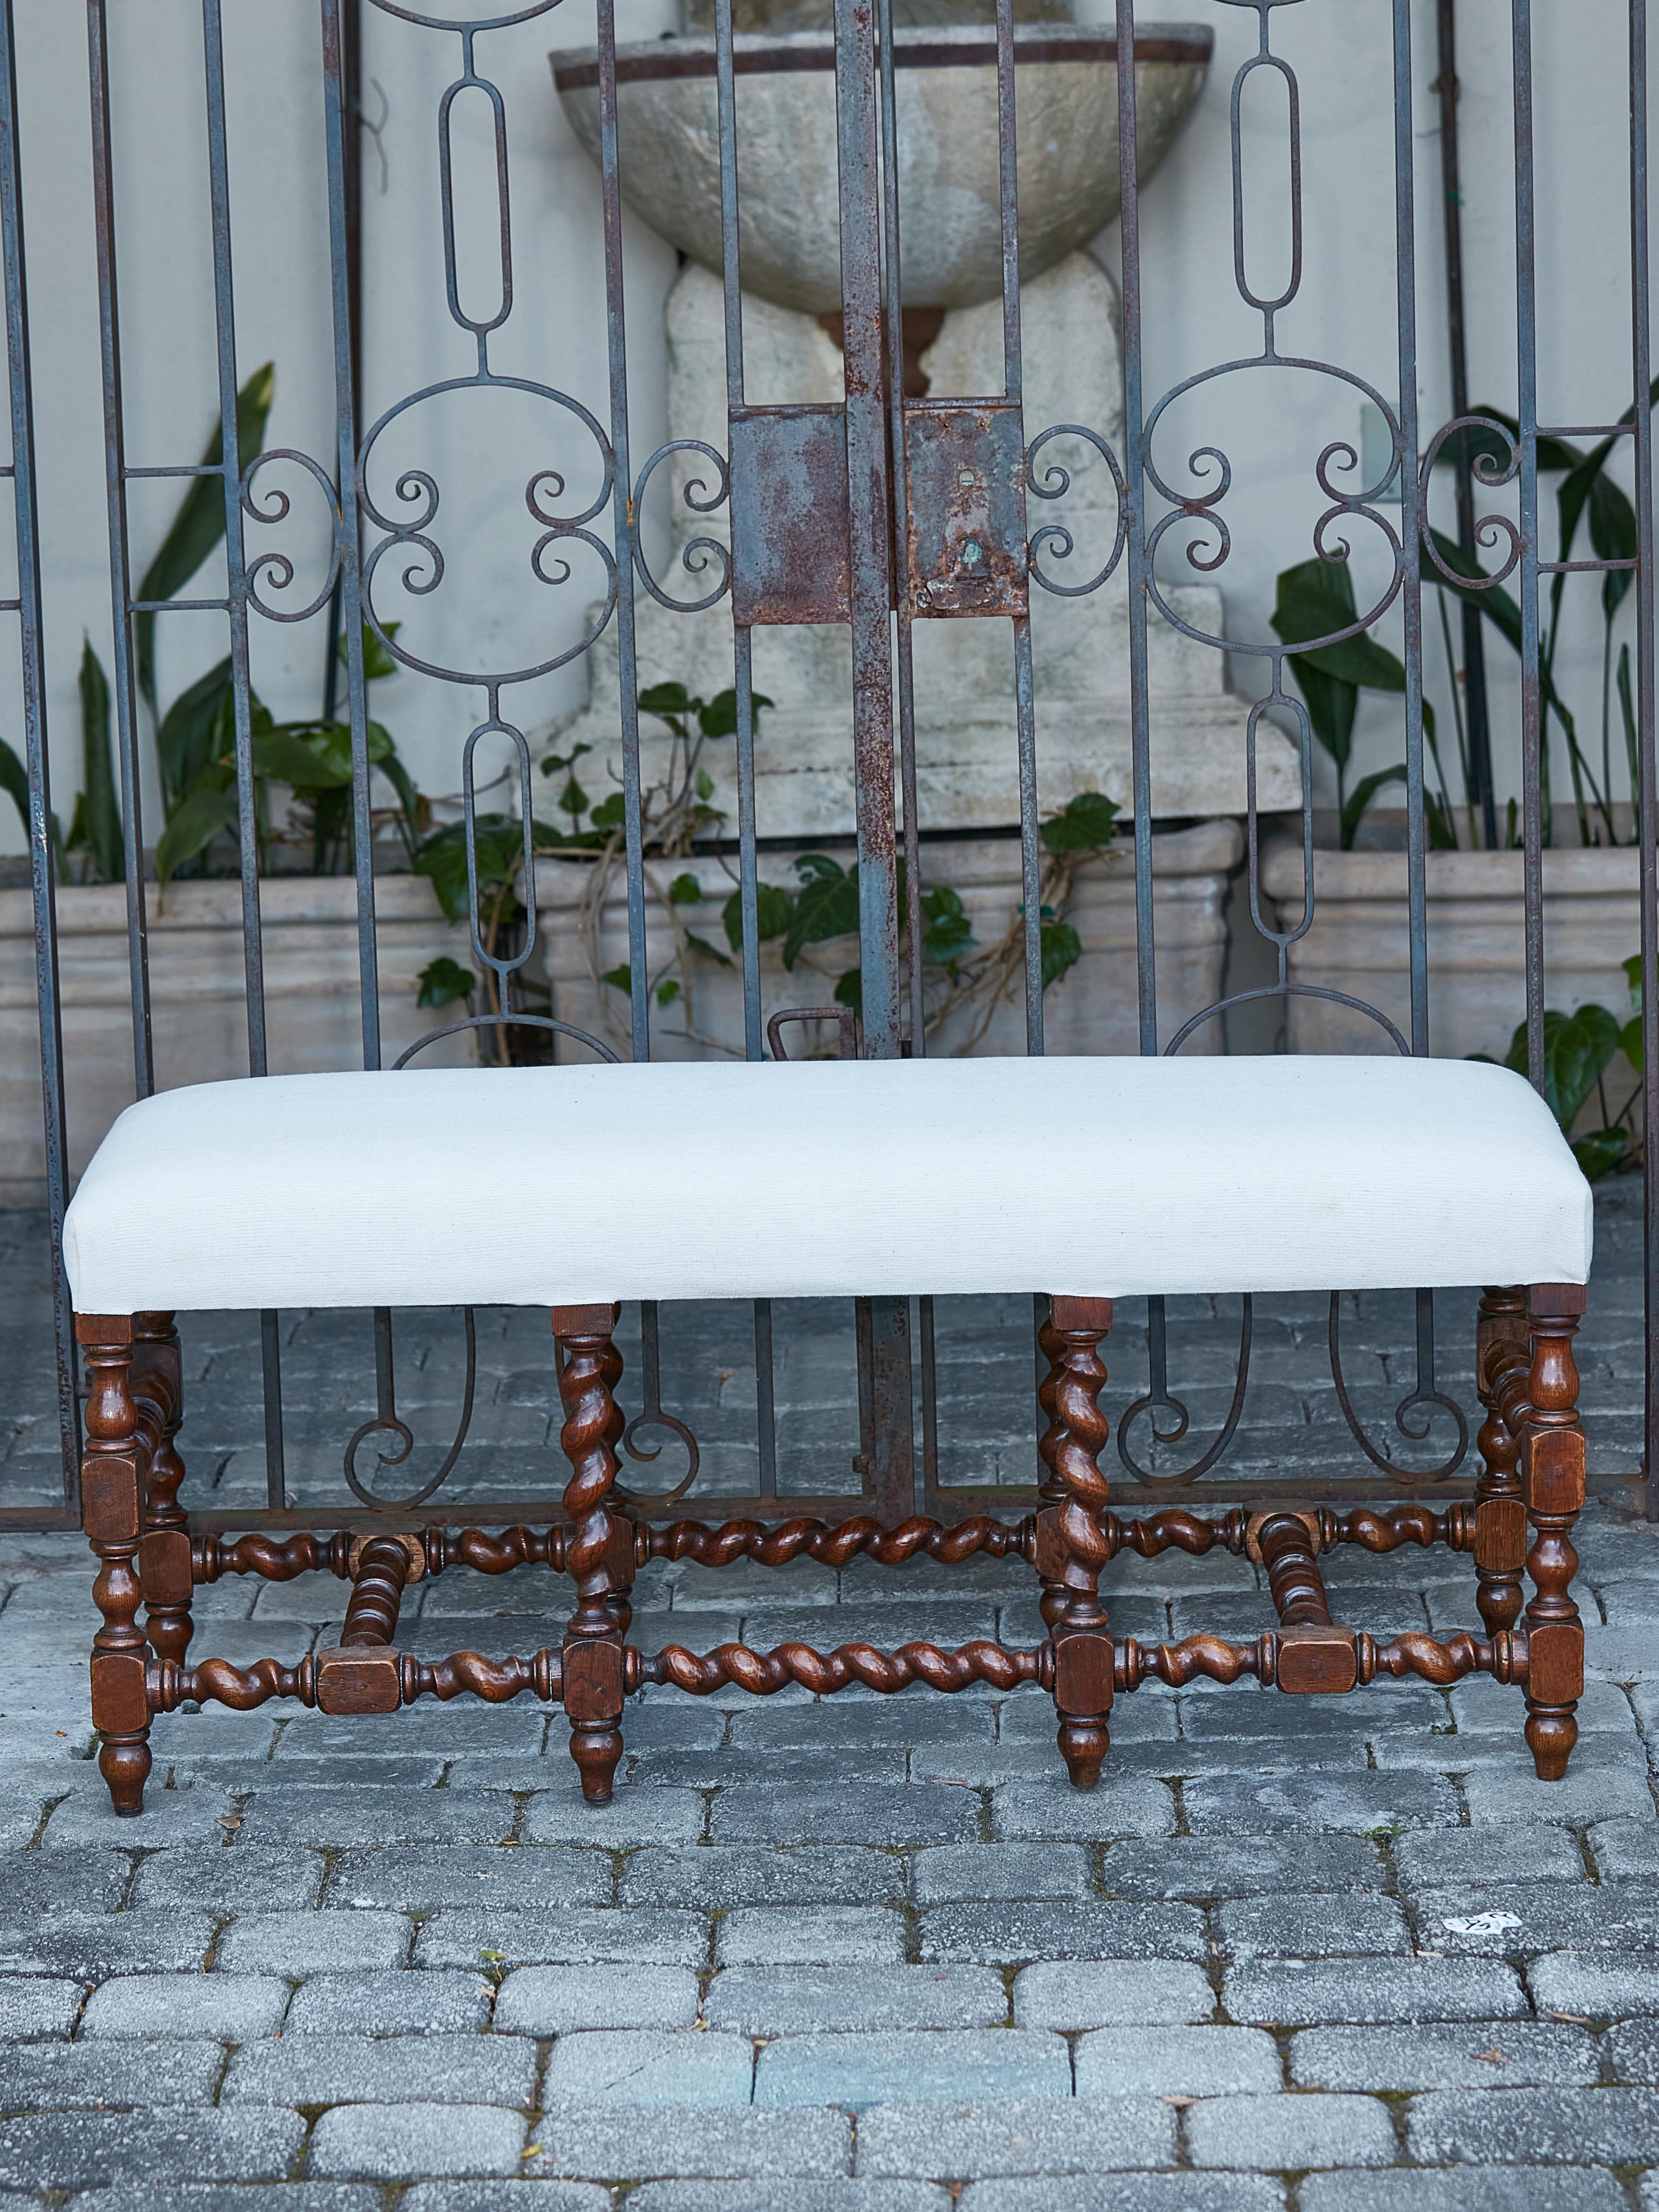 An English Turn of the Century wooden bench from circa 1900 with barley twist base and neutral toned upholstery. Behold an elegant English Turn of the Century wooden bench that exudes a blend of classic allure and timeless elegance. Crafted circa